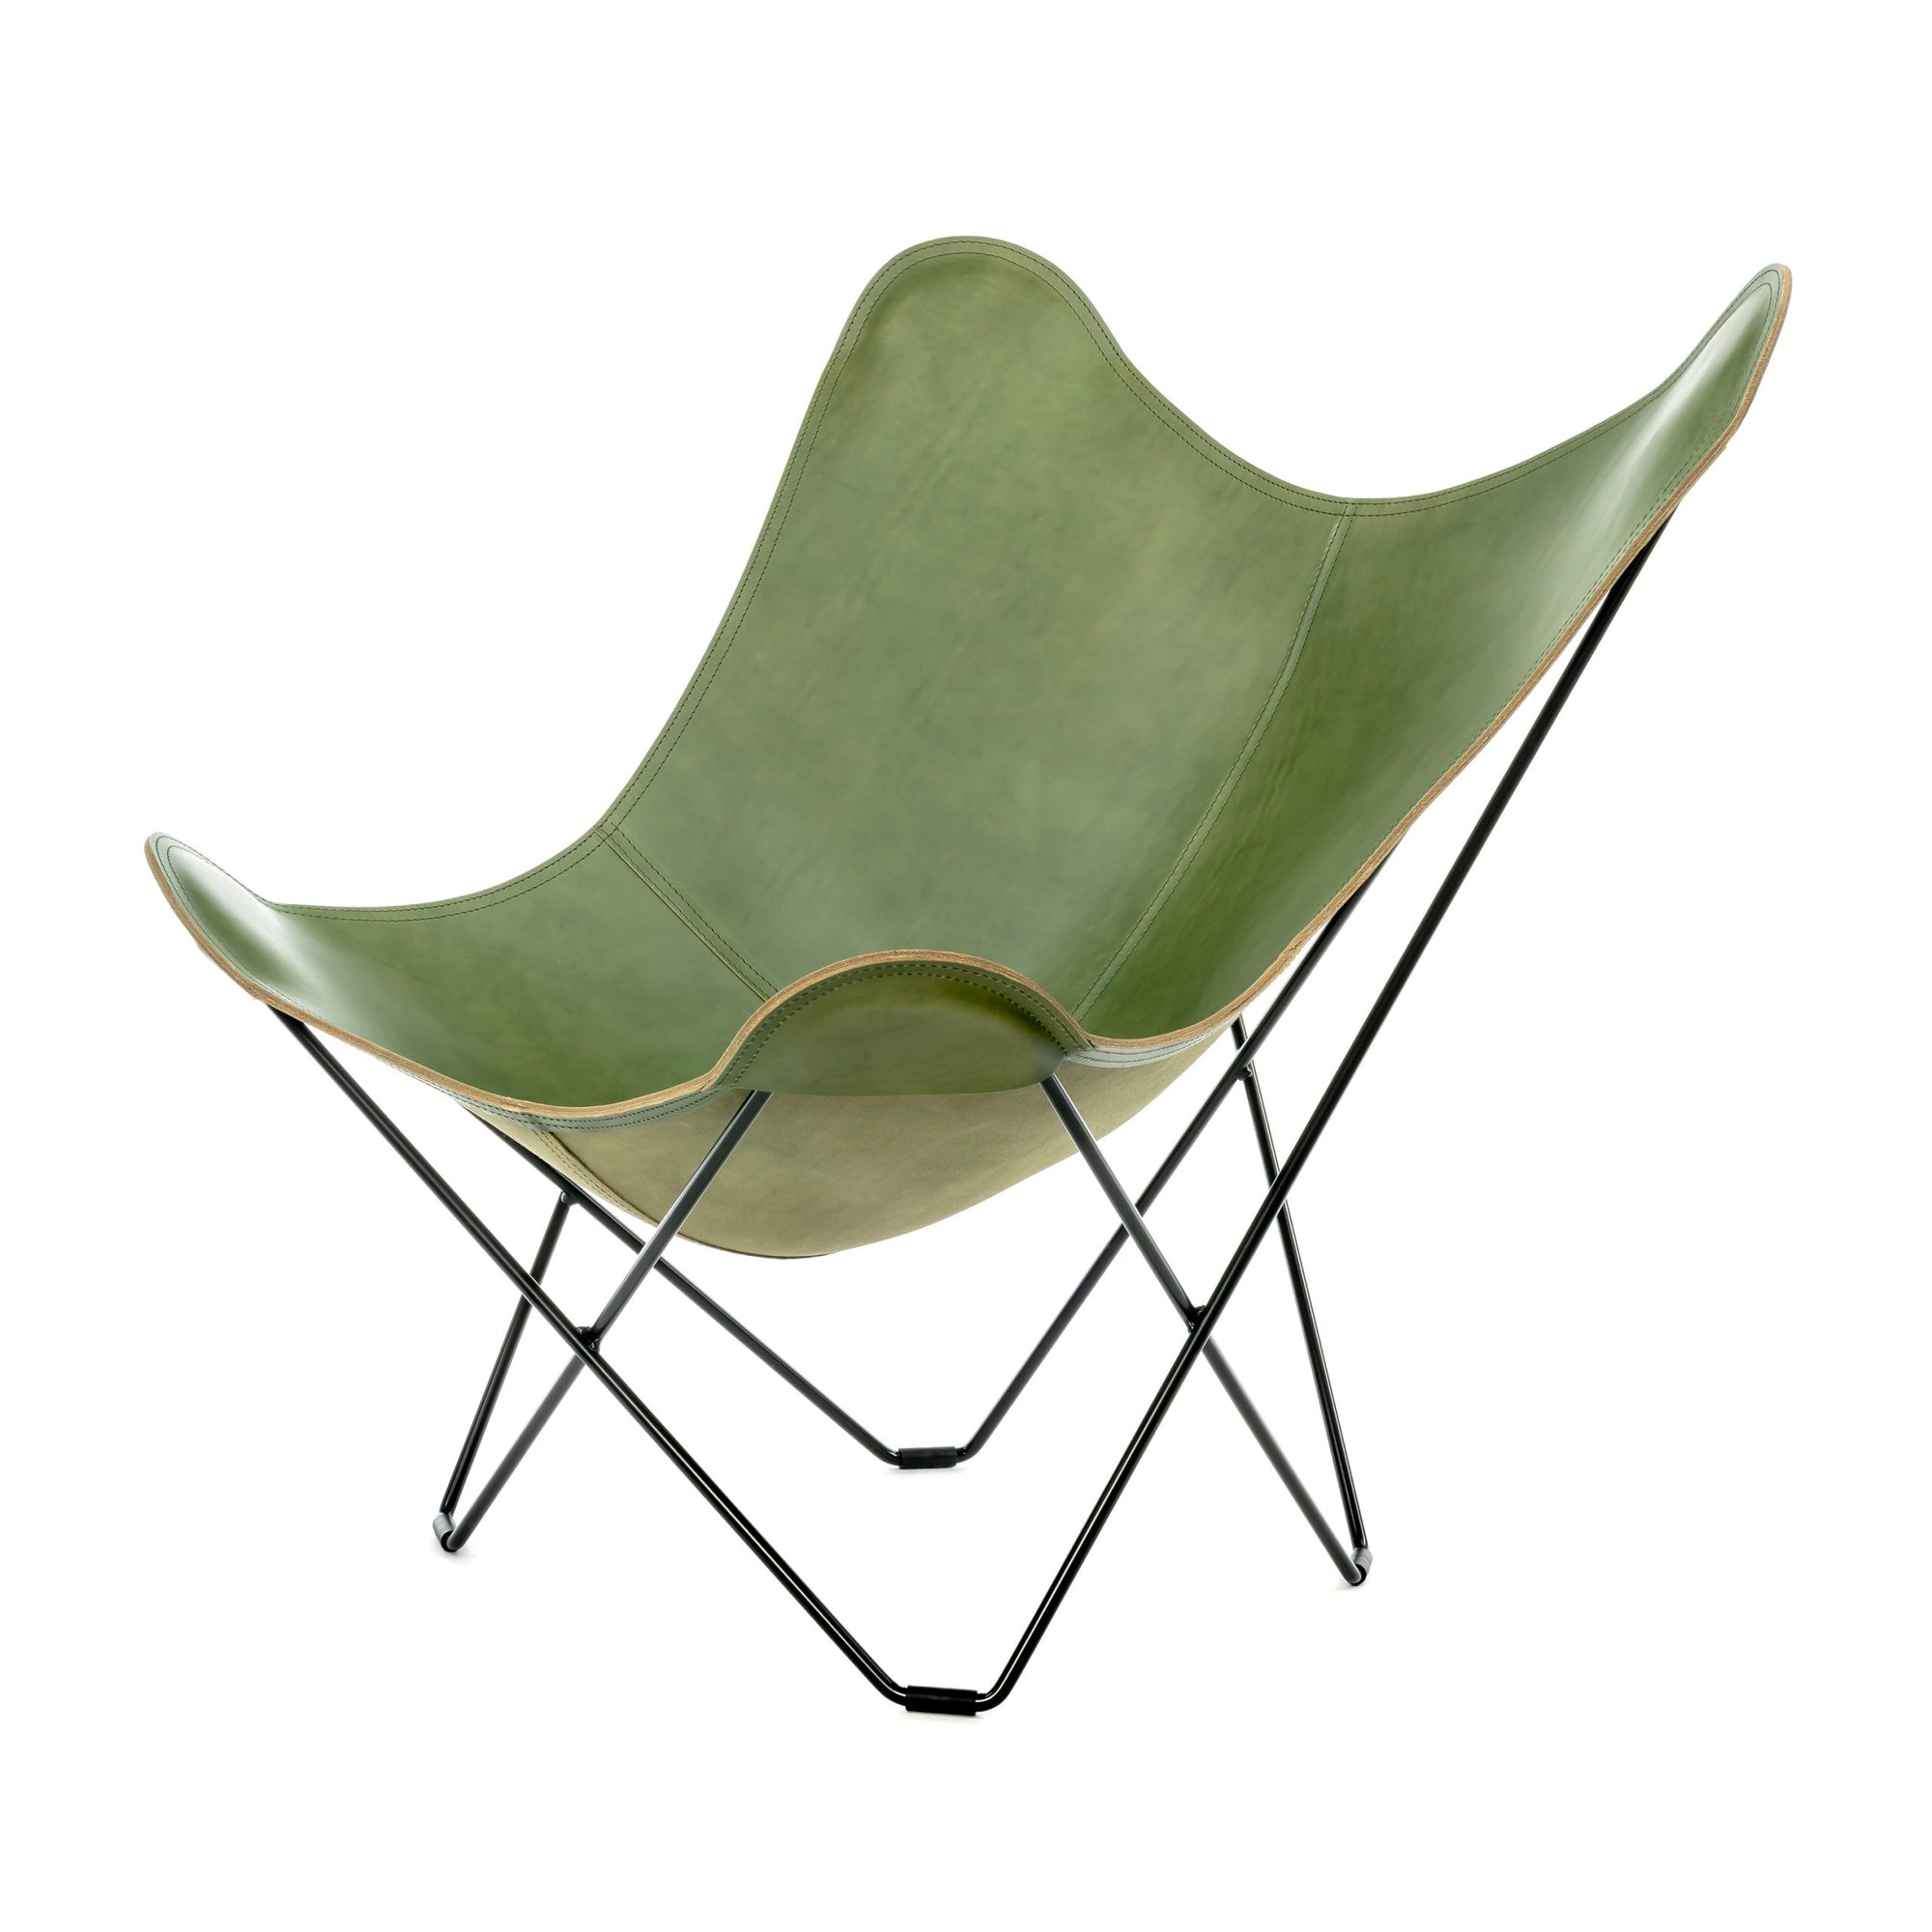 Mariposa Chair in Leather